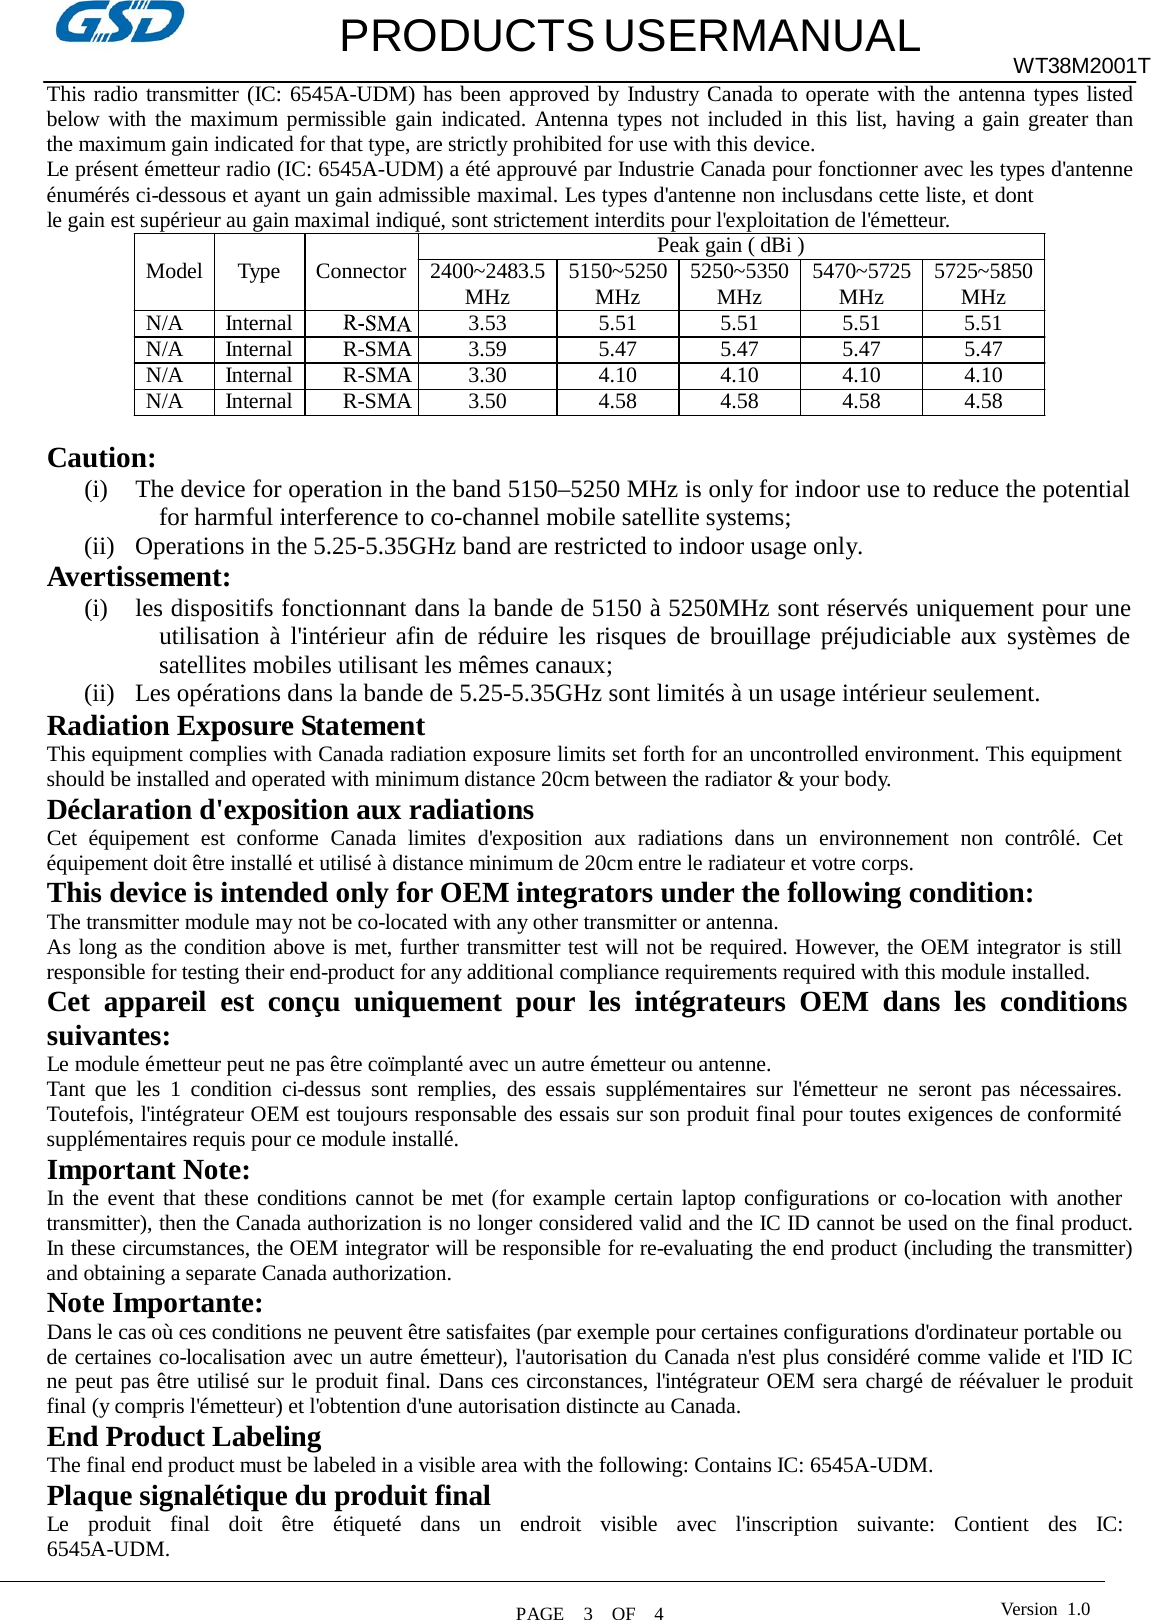   PRODUCTS USERMANUAL WT38M2001T  This radio transmitter (IC: 6545A-UDM) has been approved by Industry Canada to operate with the antenna types listed below with the maximum permissible gain indicated. Antenna types not included in this list, having a gain greater than the maximum gain indicated for that type, are strictly prohibited for use with this device. Le présent émetteur radio (IC: 6545A-UDM) a été approuvé par Industrie Canada pour fonctionner avec les types d&apos;antenne énumérés ci-dessous et ayant un gain admissible maximal. Les types d&apos;antenne non inclusdans cette liste, et dont le gain est supérieur au gain maximal indiqué, sont strictement interdits pour l&apos;exploitation de l&apos;émetteur. Peak gain ( dBi ) Model  Type  Connector  2400~2483.5 MHz  5150~5250 MHz  5250~5350 MHz  5470~5725 MHz  5725~5850 MHz N/A  Internal  3.53  5.51  5.51  5.51  5.51 N/A  Internal  R-SMA  3.59  5.47  5.47  5.47  5.47 N/A  Internal  R-SMA  3.30  4.10  4.10  4.10  4.10 N/A  Internal  R-SMA  3.50  4.58  4.58  4.58  4.58  Caution: (i) The device for operation in the band 5150–5250 MHz is only for indoor use to reduce the potential for harmful interference to co-channel mobile satellite systems; (ii) Operations in the 5.25-5.35GHz band are restricted to indoor usage only. Avertissement: (i) les dispositifs fonctionnant dans la bande de 5150 à 5250MHz sont réservés uniquement pour une utilisation à l&apos;intérieur afin de réduire les risques de brouillage préjudiciable aux systèmes de satellites mobiles utilisant les mêmes canaux; (ii) Les opérations dans la bande de 5.25-5.35GHz sont limités à un usage intérieur seulement. Radiation Exposure Statement This equipment complies with Canada radiation exposure limits set forth for an uncontrolled environment. This equipment should be installed and operated with minimum distance 20cm between the radiator &amp; your body. Déclaration d&apos;exposition aux radiations Cet  équipement  est  conforme  Canada  limites  d&apos;exposition  aux  radiations  dans  un  environnement  non  contrôlé.  Cet équipement doit être installé et utilisé à distance minimum de 20cm entre le radiateur et votre corps. This device is intended only for OEM integrators under the following condition: The transmitter module may not be co-located with any other transmitter or antenna. As long as the condition above is met, further transmitter test will not be required. However, the OEM integrator is still responsible for testing their end-product for any additional compliance requirements required with this module installed. Cet  appareil  est  conçu  uniquement  pour  les  intégrateurs  OEM  dans  les  conditions suivantes: Le module émetteur peut ne pas être coïmplanté avec un autre émetteur ou antenne. Tant  que  les  1  condition  ci-dessus  sont  remplies,  des  essais  supplémentaires  sur  l&apos;émetteur  ne  seront  pas  nécessaires. Toutefois, l&apos;intégrateur OEM est toujours responsable des essais sur son produit final pour toutes exigences de conformité supplémentaires requis pour ce module installé. Important Note: In the event that these conditions cannot be met (for example certain laptop configurations or co-location with another transmitter), then the Canada authorization is no longer considered valid and the IC ID cannot be used on the final product. In these circumstances, the OEM integrator will be responsible for re-evaluating the end product (including the transmitter) and obtaining a separate Canada authorization. Note Importante: Dans le cas où ces conditions ne peuvent être satisfaites (par exemple pour certaines configurations d&apos;ordinateur portable ou de certaines co-localisation avec un autre émetteur), l&apos;autorisation du Canada n&apos;est plus considéré comme valide et l&apos;ID IC ne peut pas être utilisé sur le produit final. Dans ces circonstances, l&apos;intégrateur OEM sera chargé de réévaluer le produit final (y compris l&apos;émetteur) et l&apos;obtention d&apos;une autorisation distincte au Canada. End Product Labeling The final end product must be labeled in a visible area with the following: Contains IC: 6545A-UDM. Plaque signalétique du produit final Le   produit   final   doit   être   étiqueté   dans   un   endroit   visible   avec   l&apos;inscription   suivante:   Contient   des   IC: 6545A-UDM. Version  1.0 PAGE    3    OF    4  